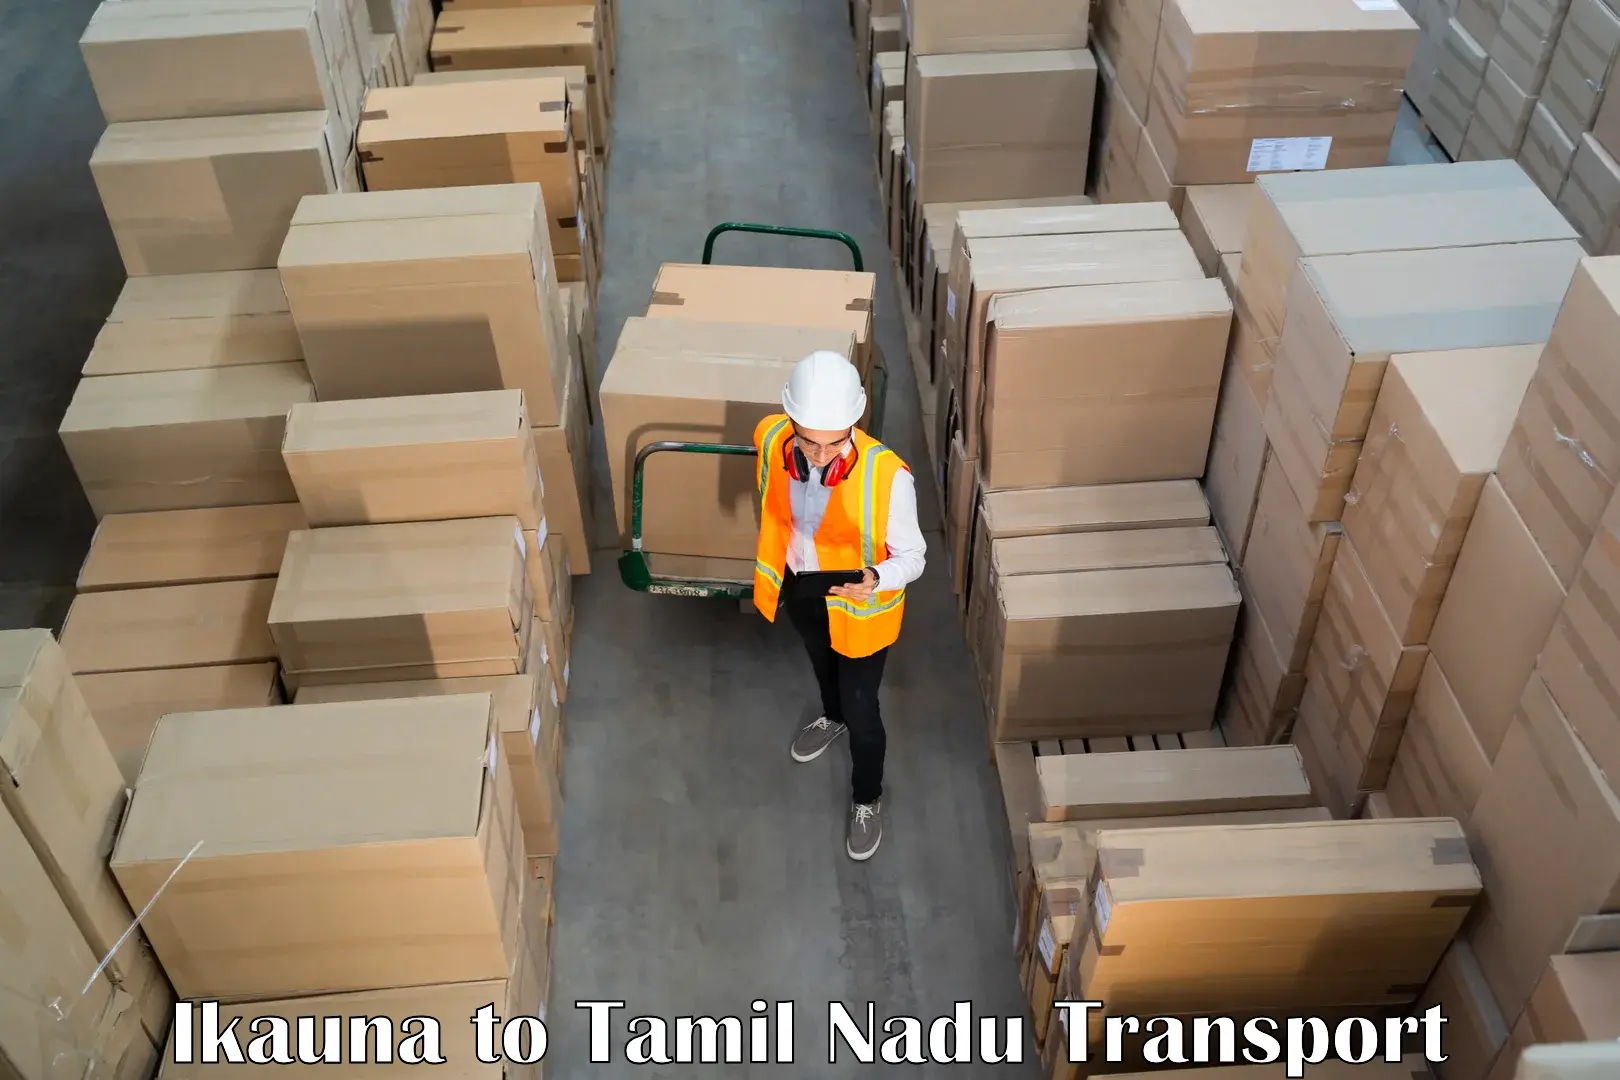 Domestic goods transportation services Ikauna to Saveetha Institute of Medical and Technical Sciences Chennai